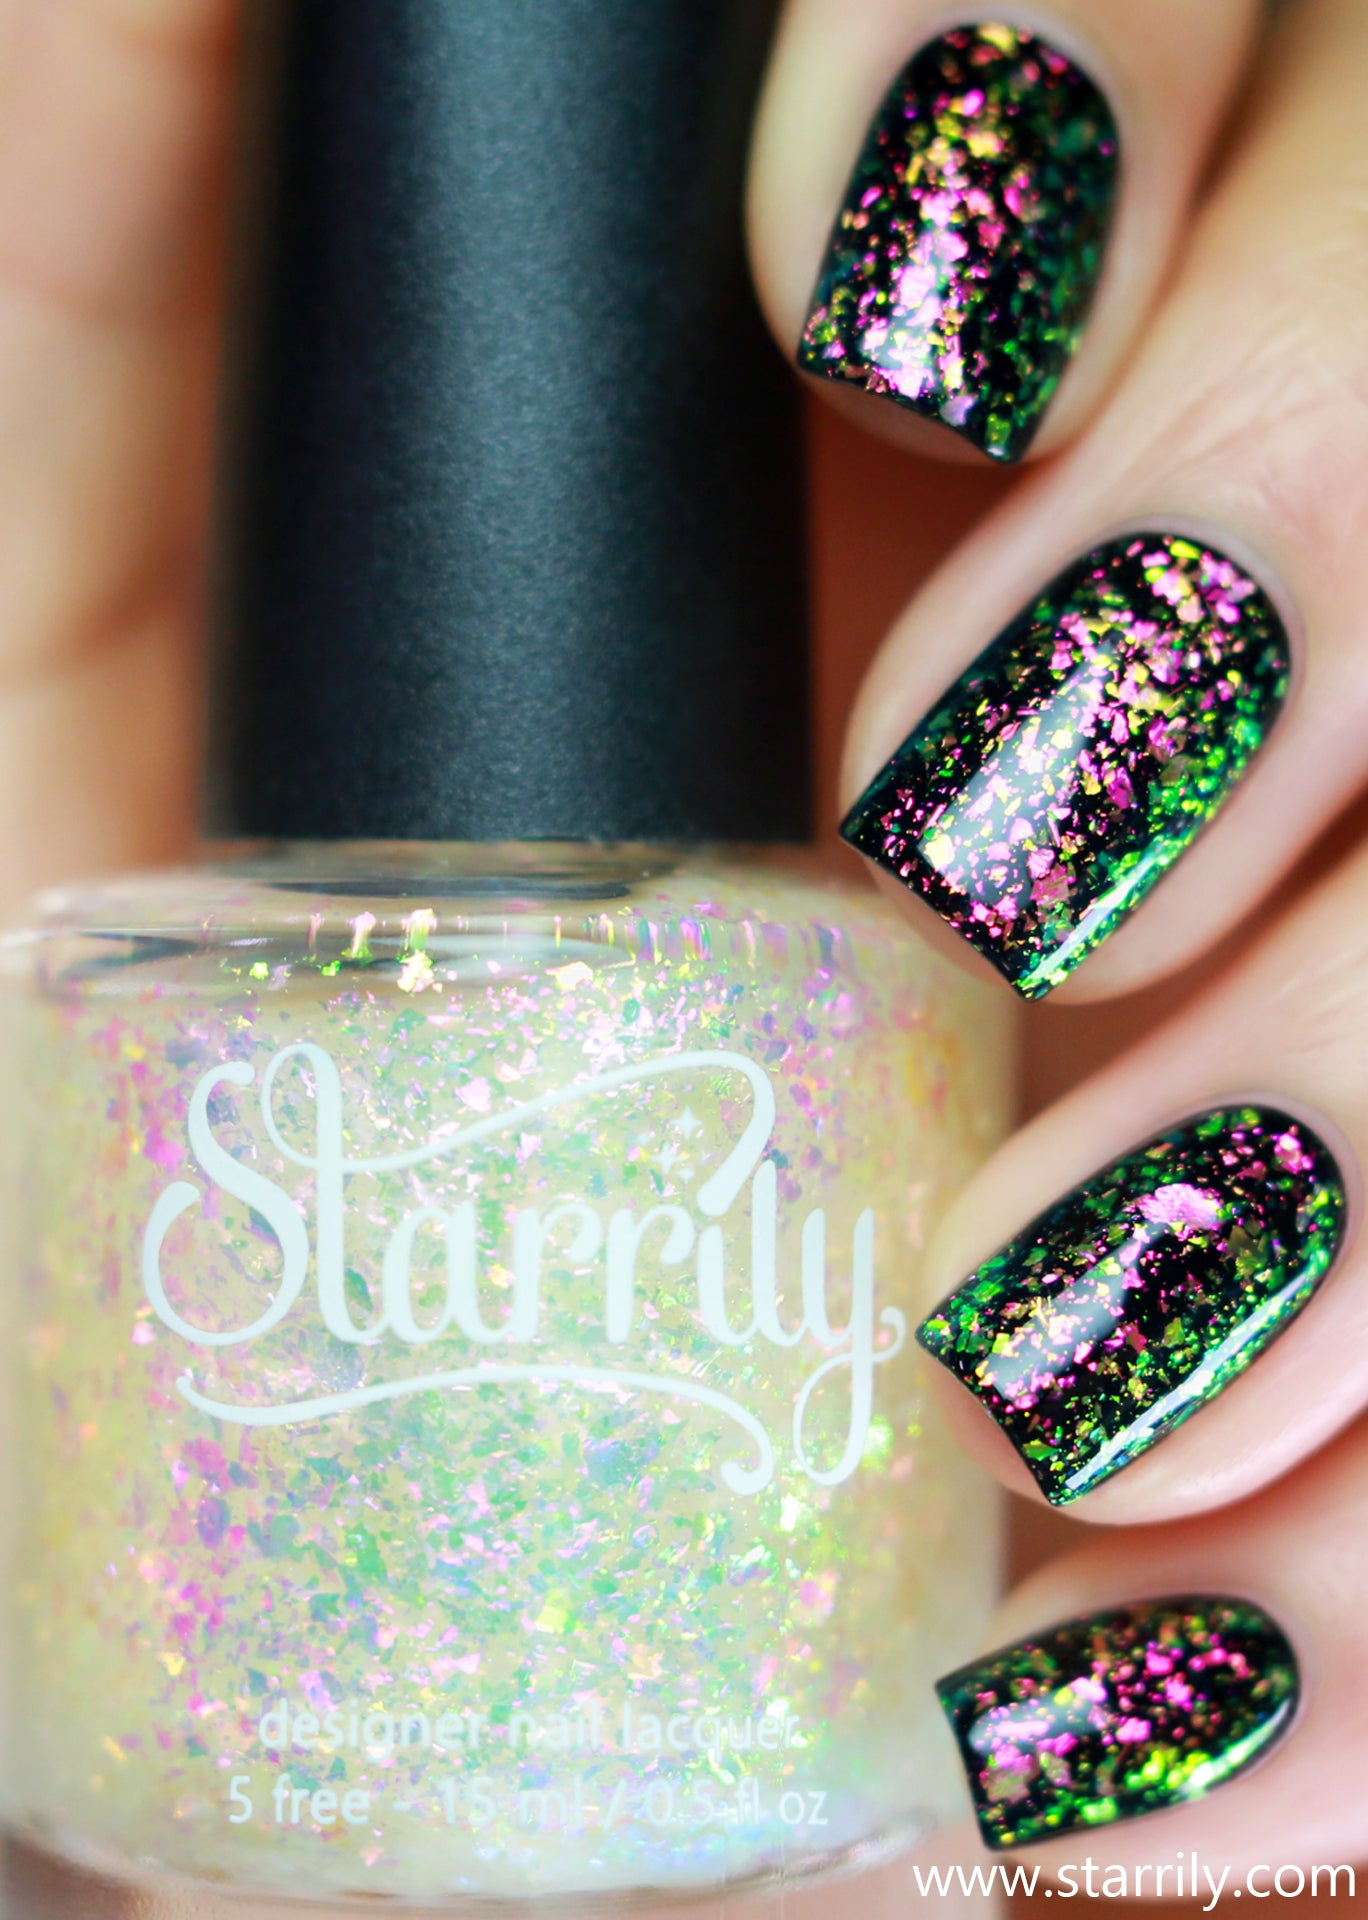 Enchanted is an enchanting colorshifting iridescent topper with magical flakes